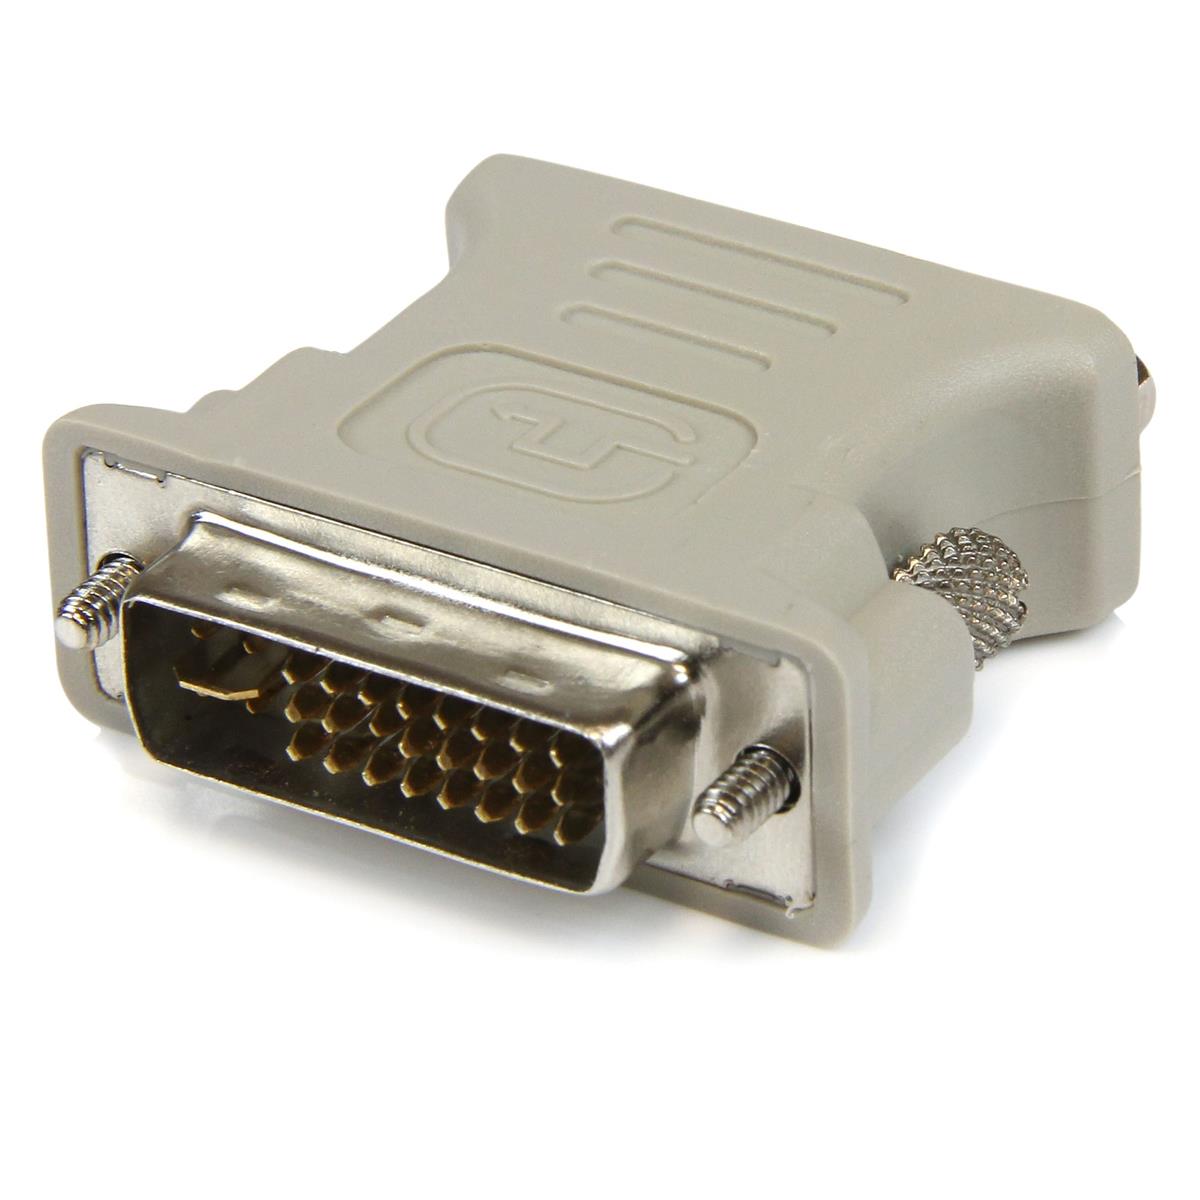 

StarTech 29 Pin DVI-I Male to 15 Pin VGA Female Cable Adapter, Beige